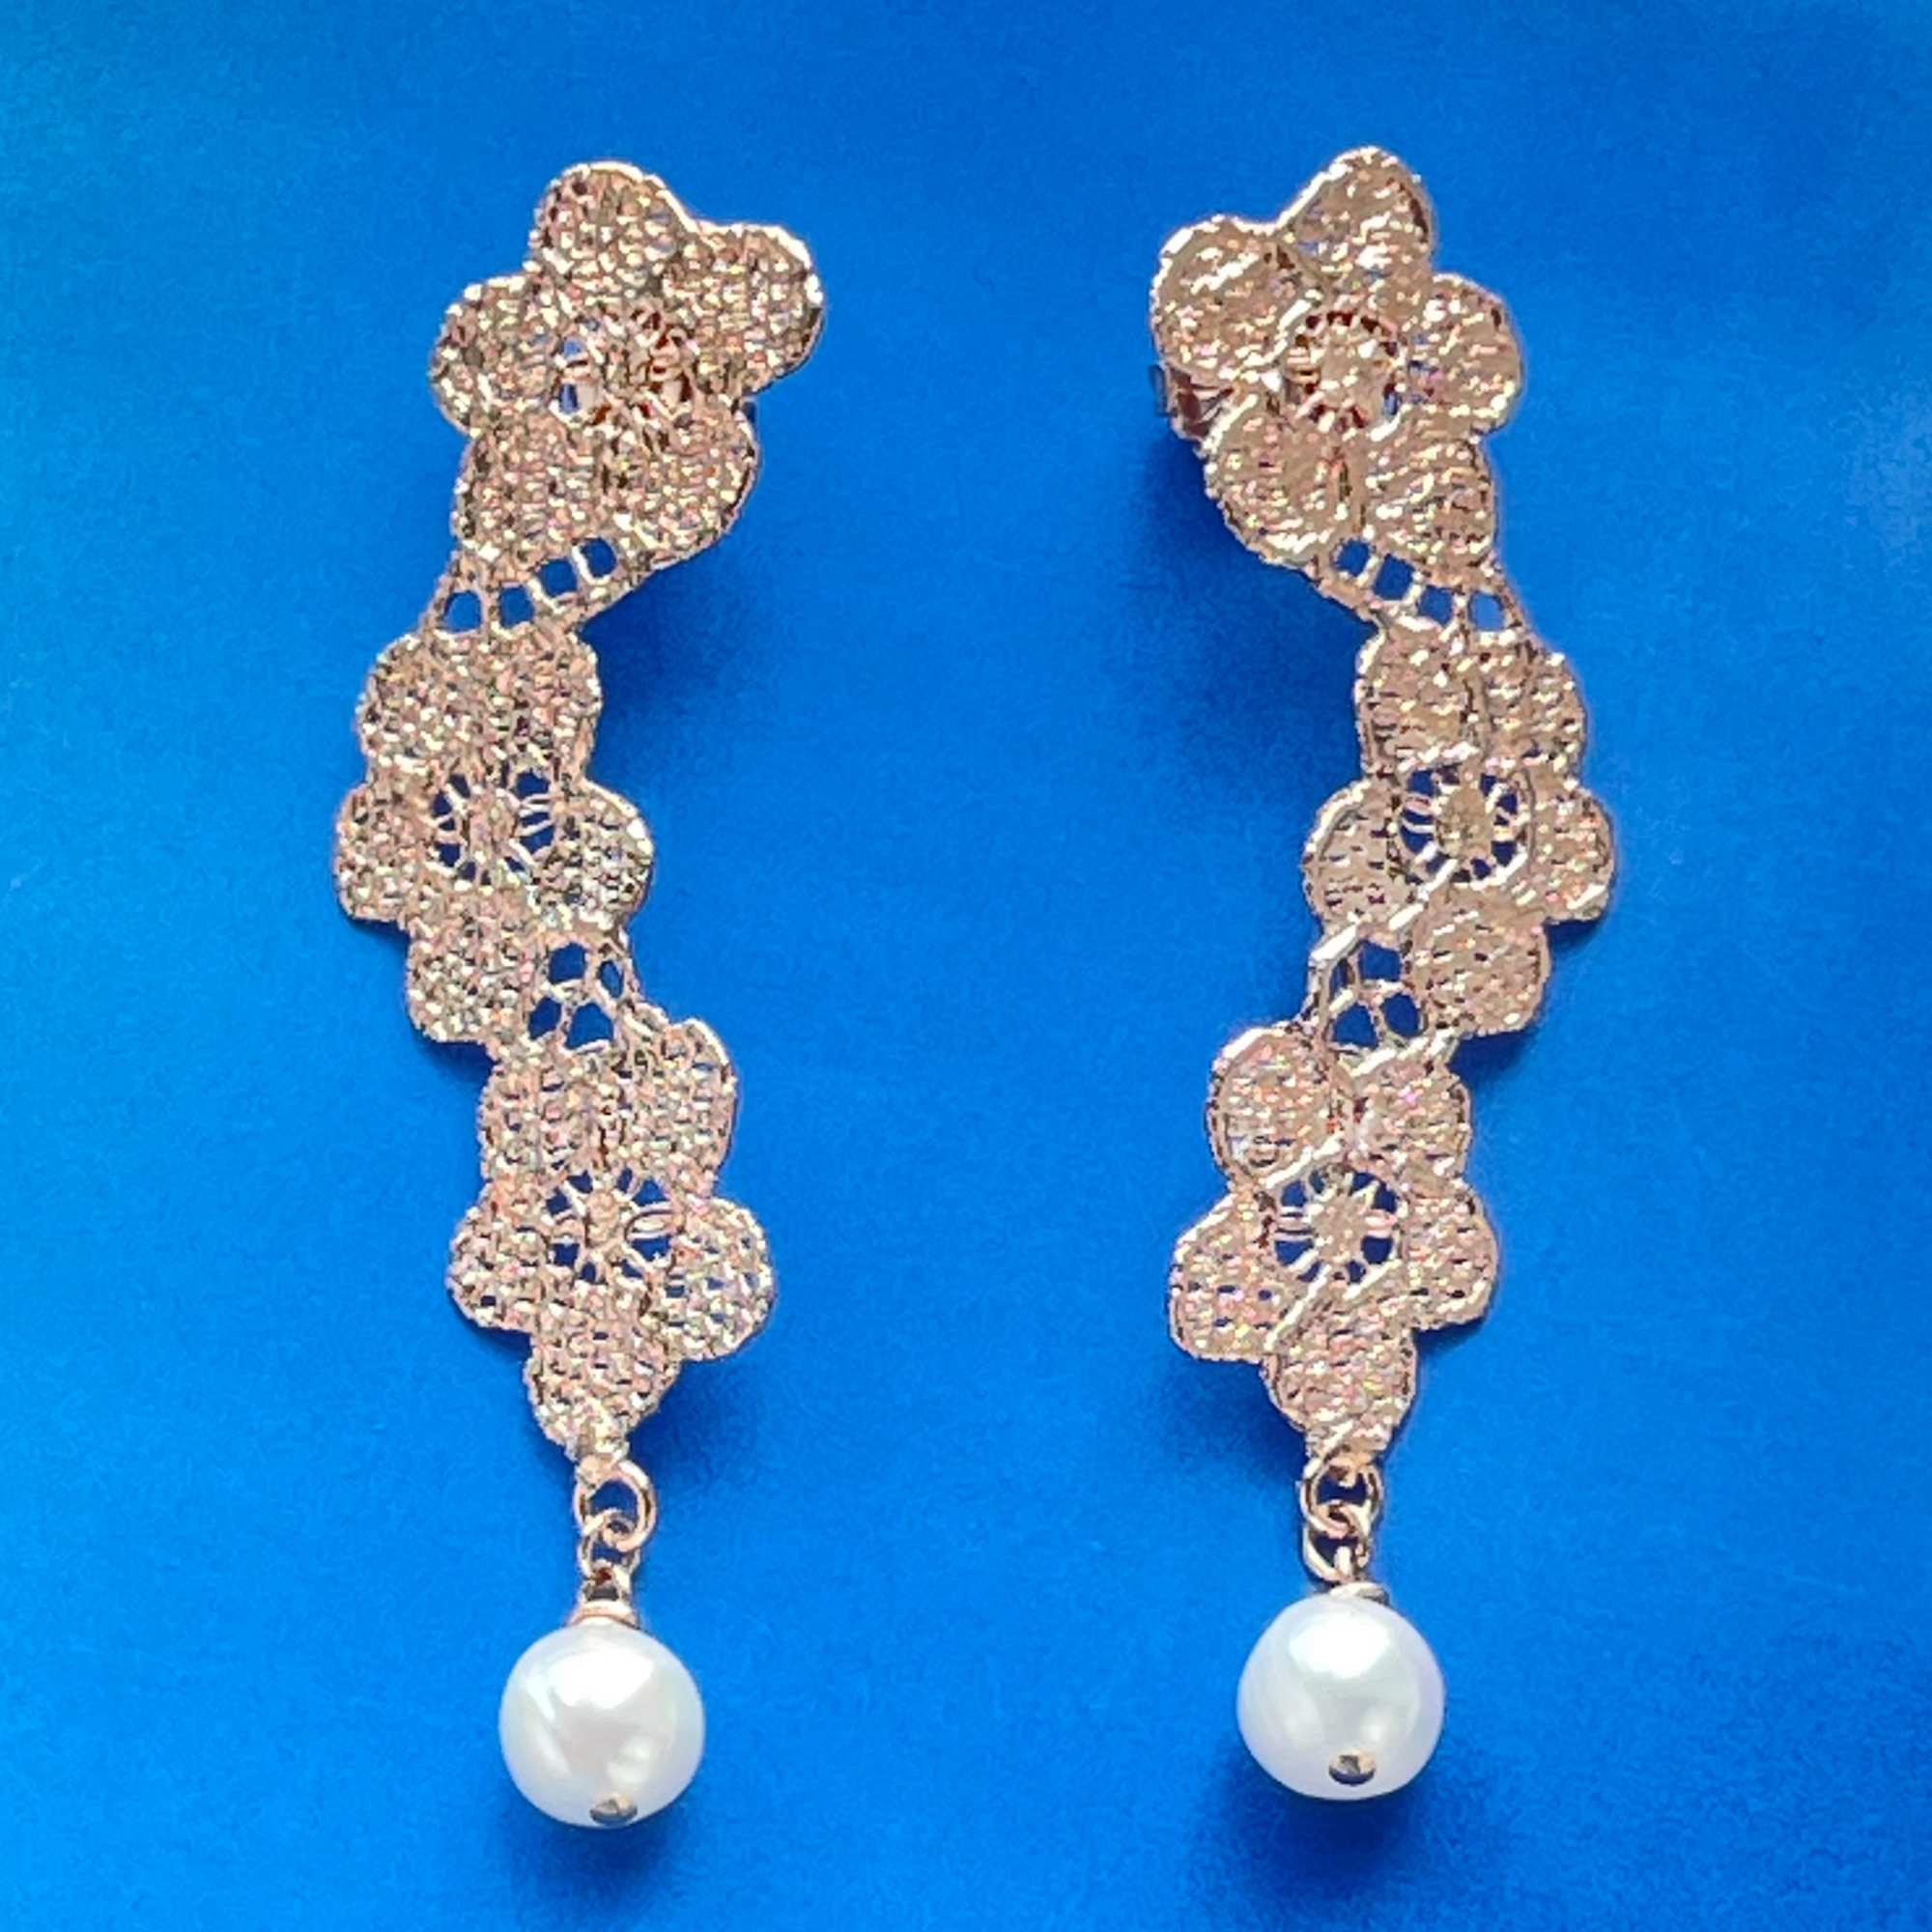 Pearl earrings with lace flower garland dipped in rose gold.